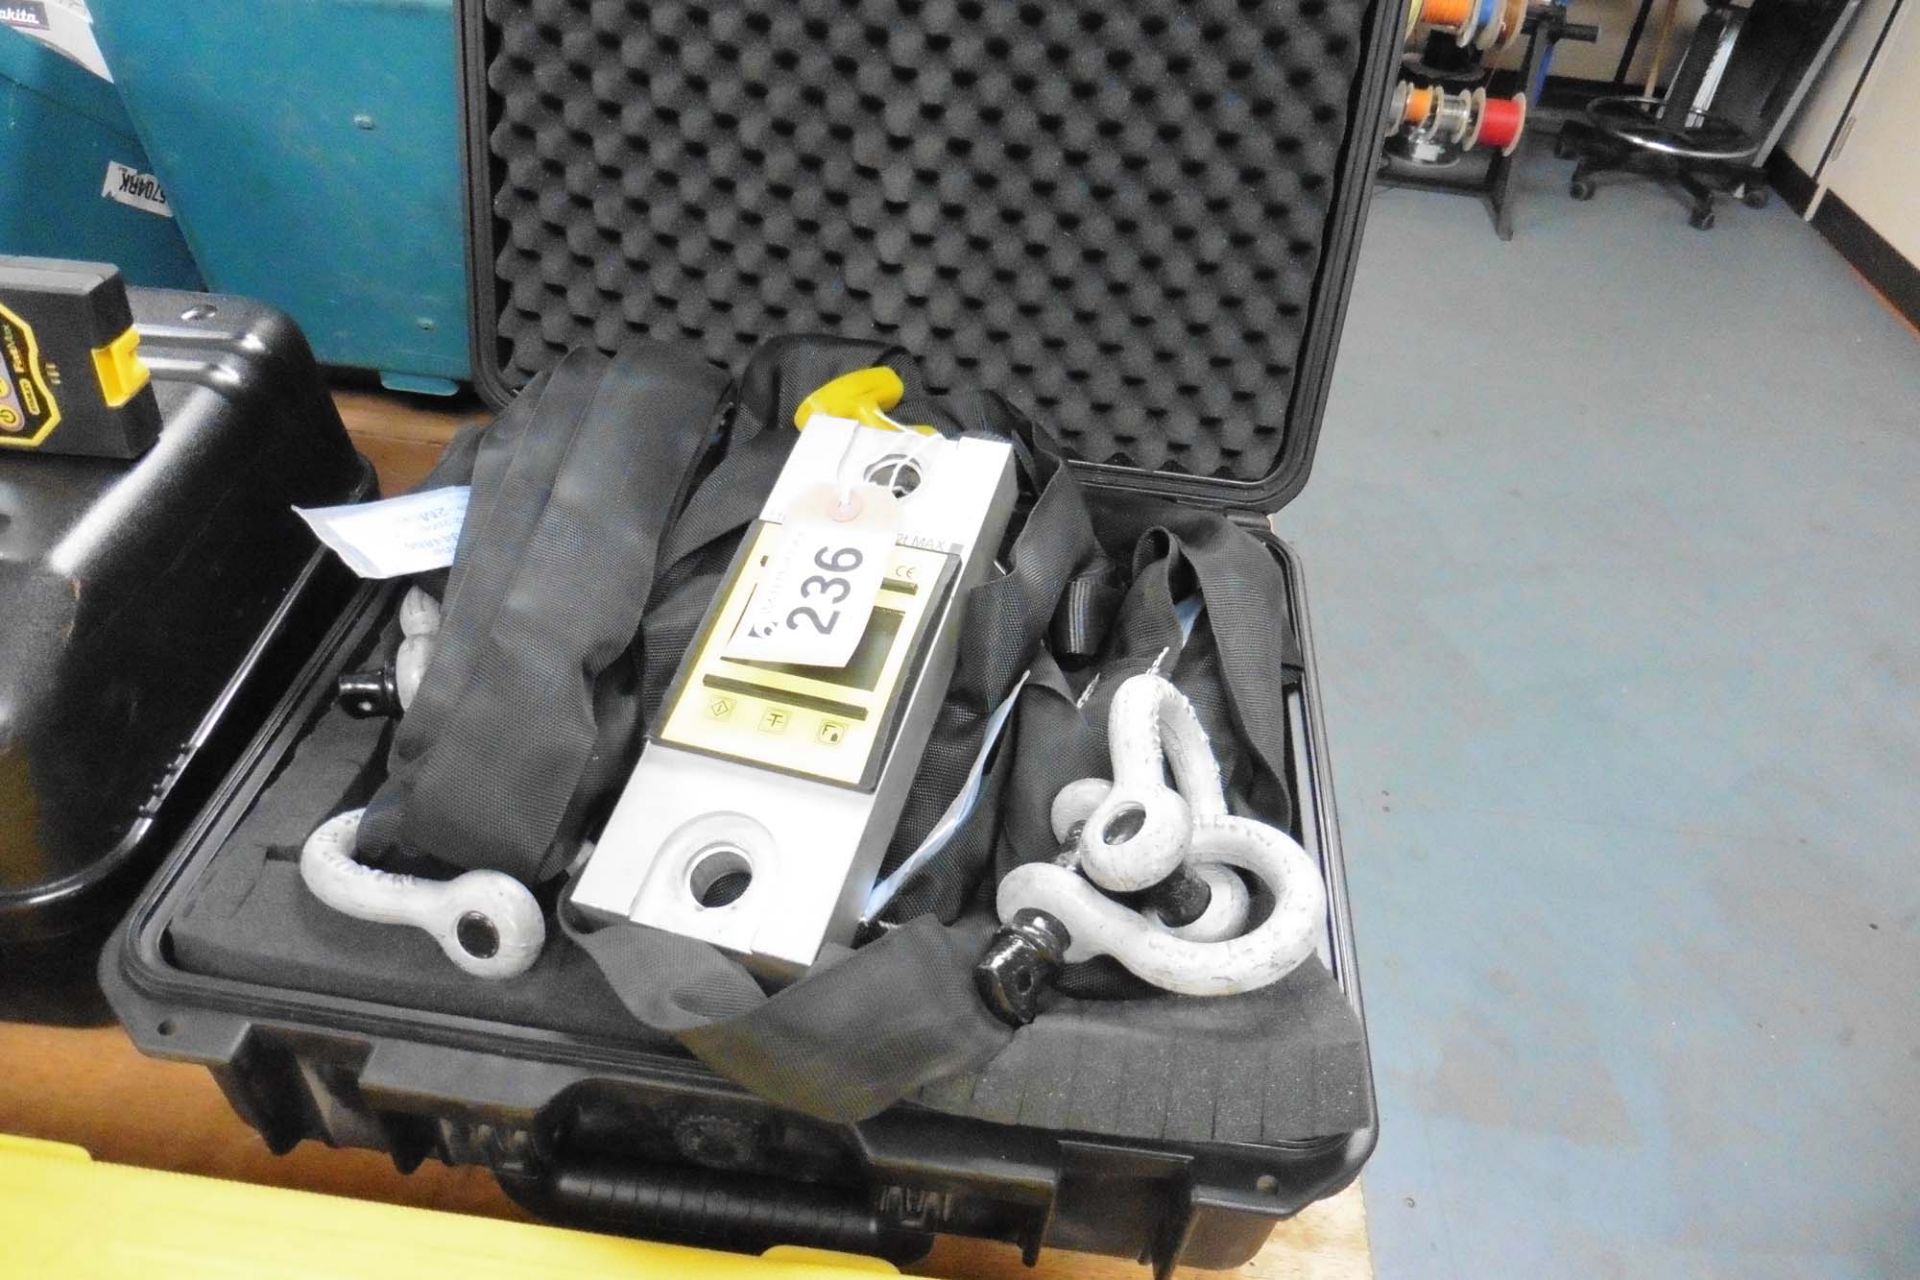 2 tonne max capacity load cell with assorted strap shackles and peli case